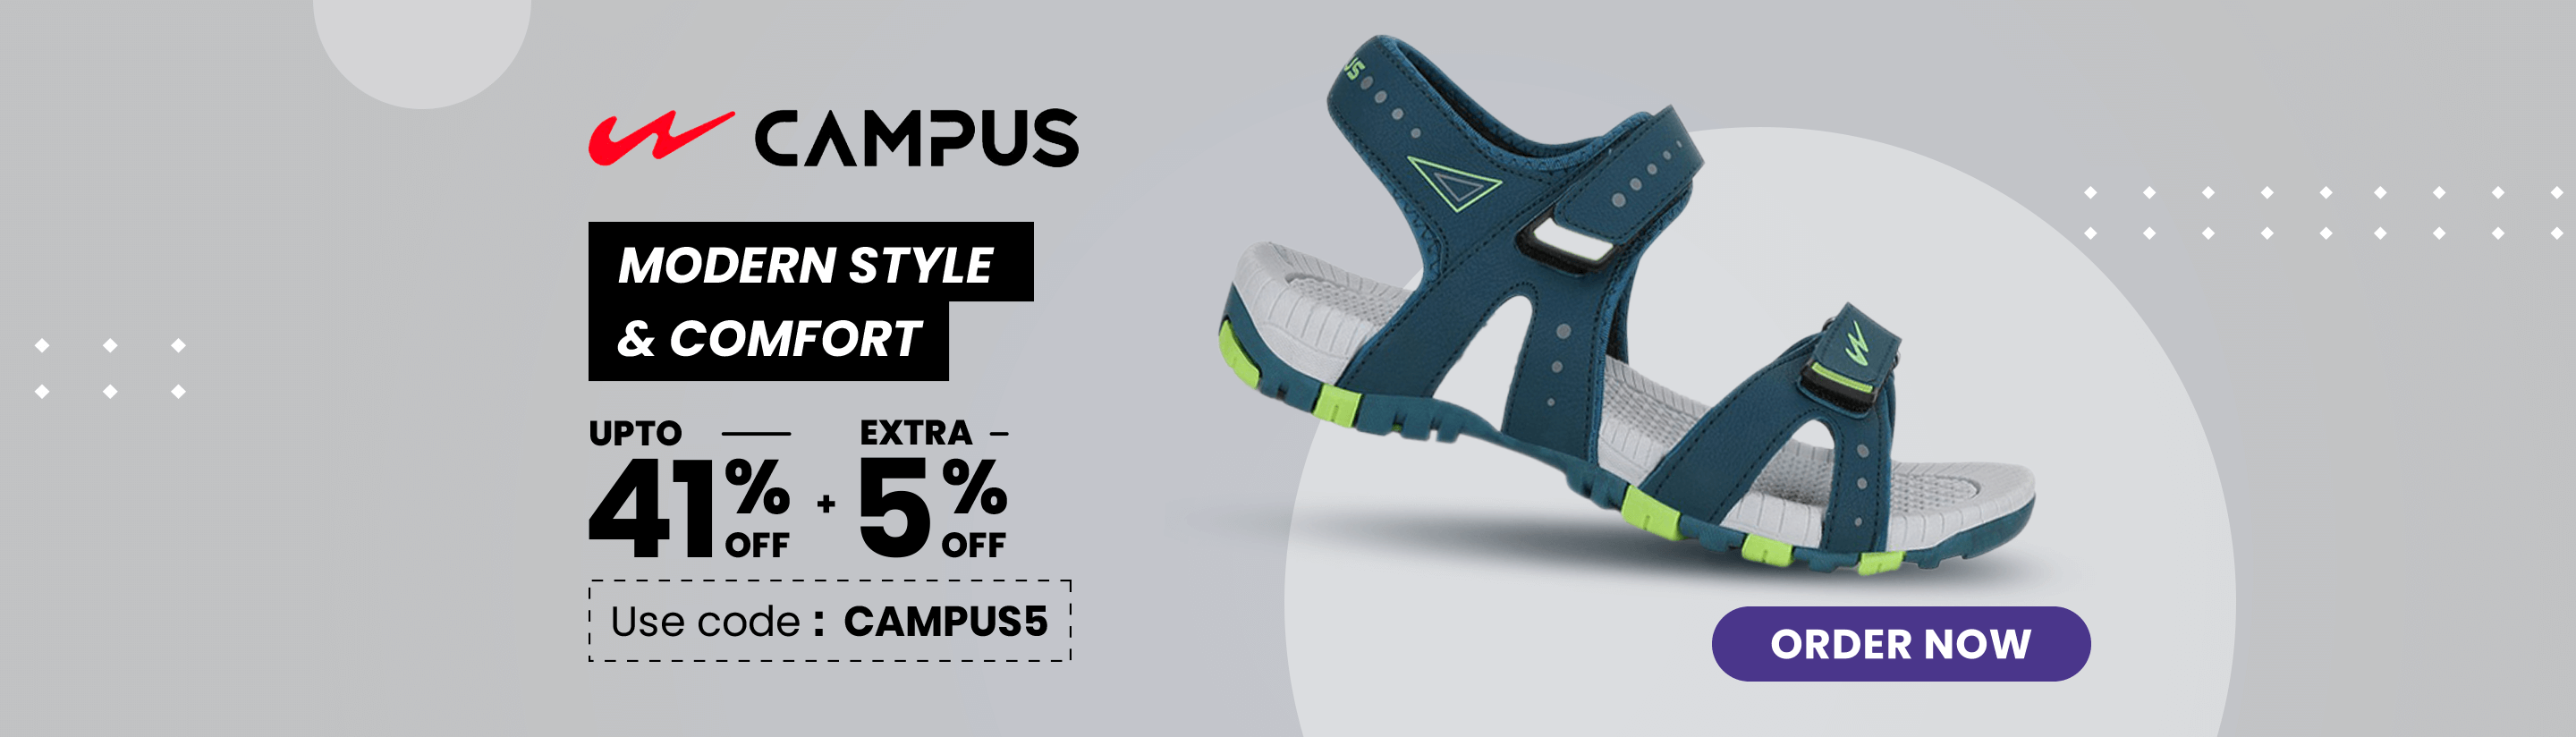 Campus Shoes upto 41% off + Extra 5% off Uniket